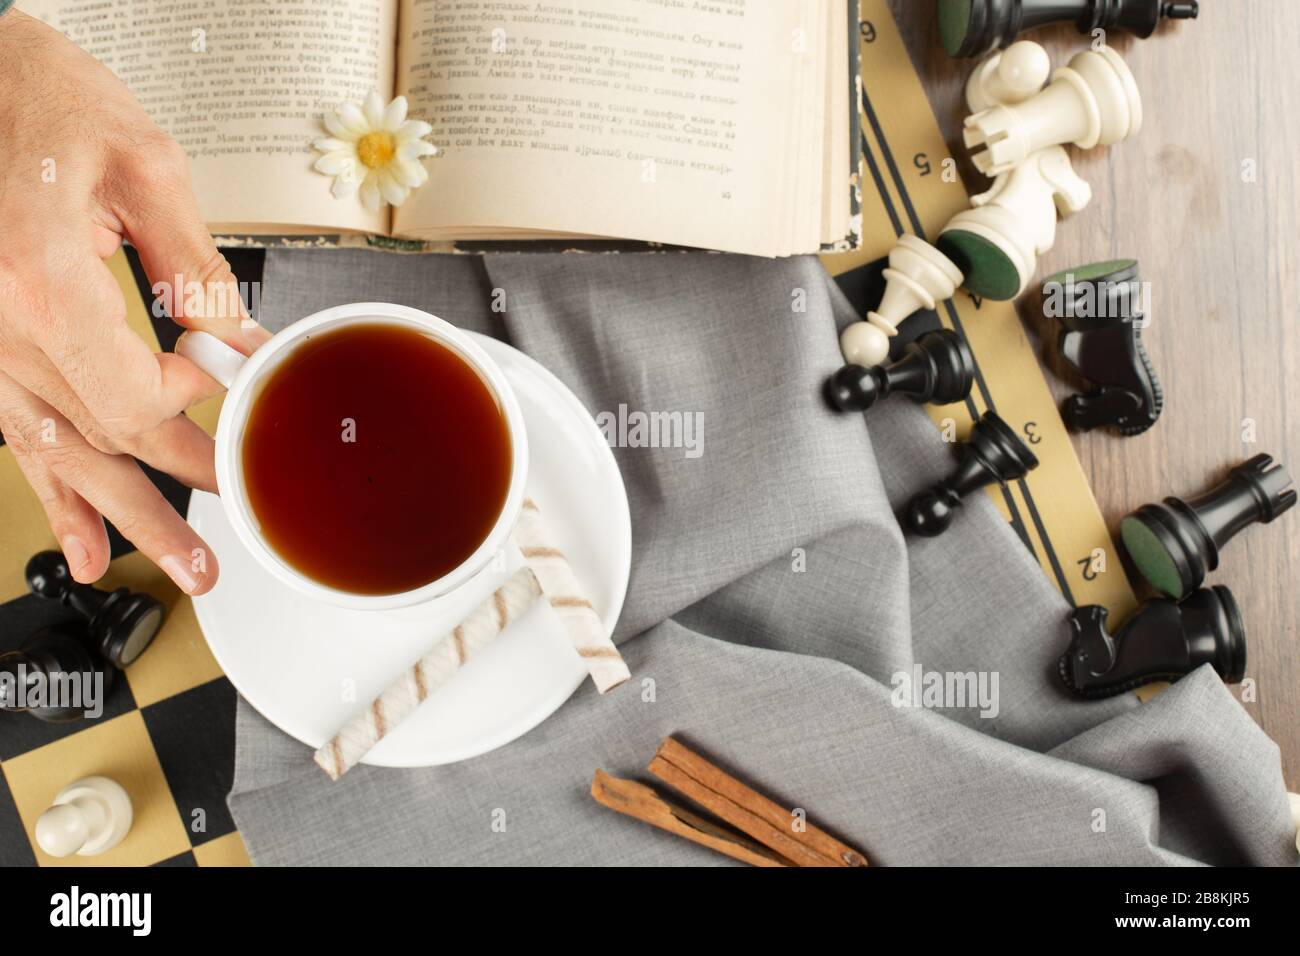 A cup of tea, a book and chess figures Stock Photo